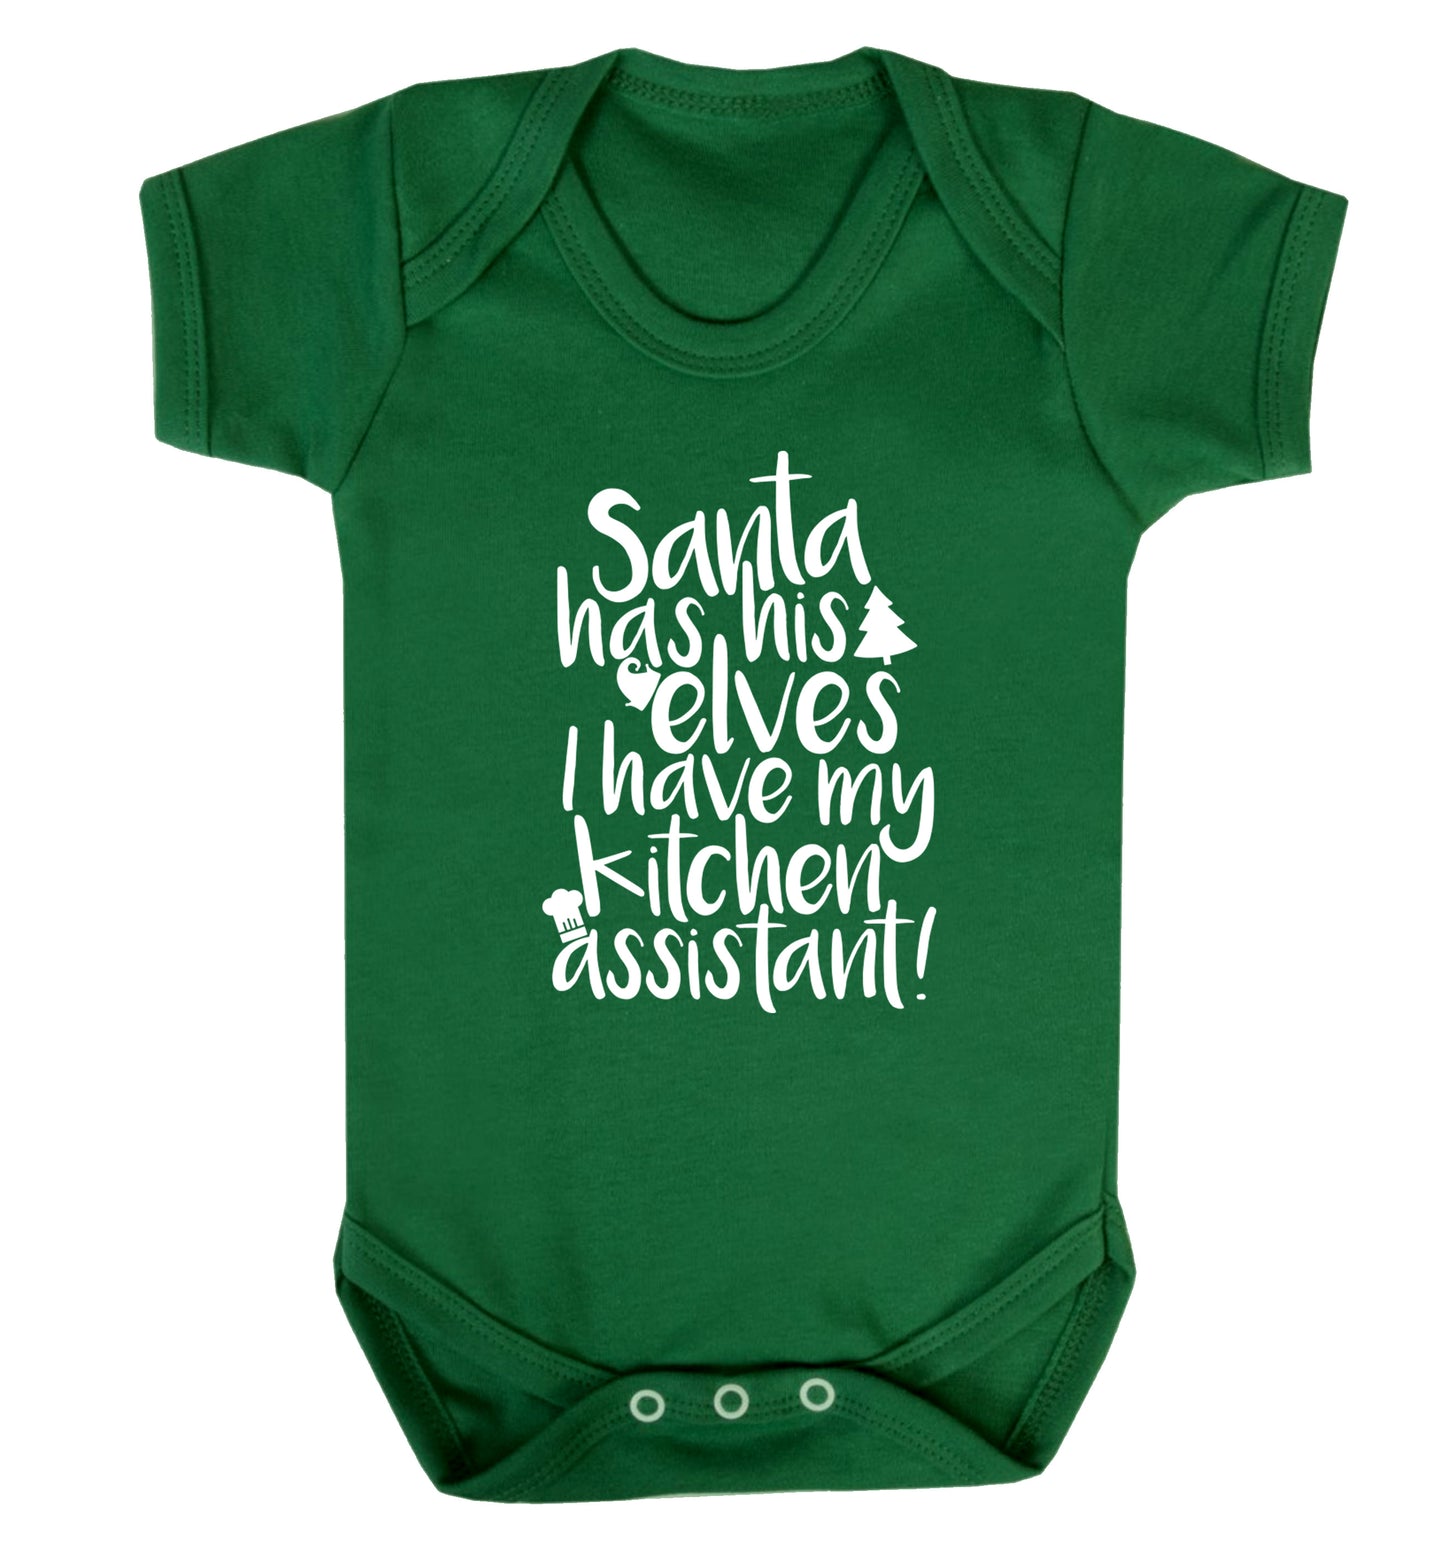 Santa has his elves I have my kitchen assistant Baby Vest green 18-24 months